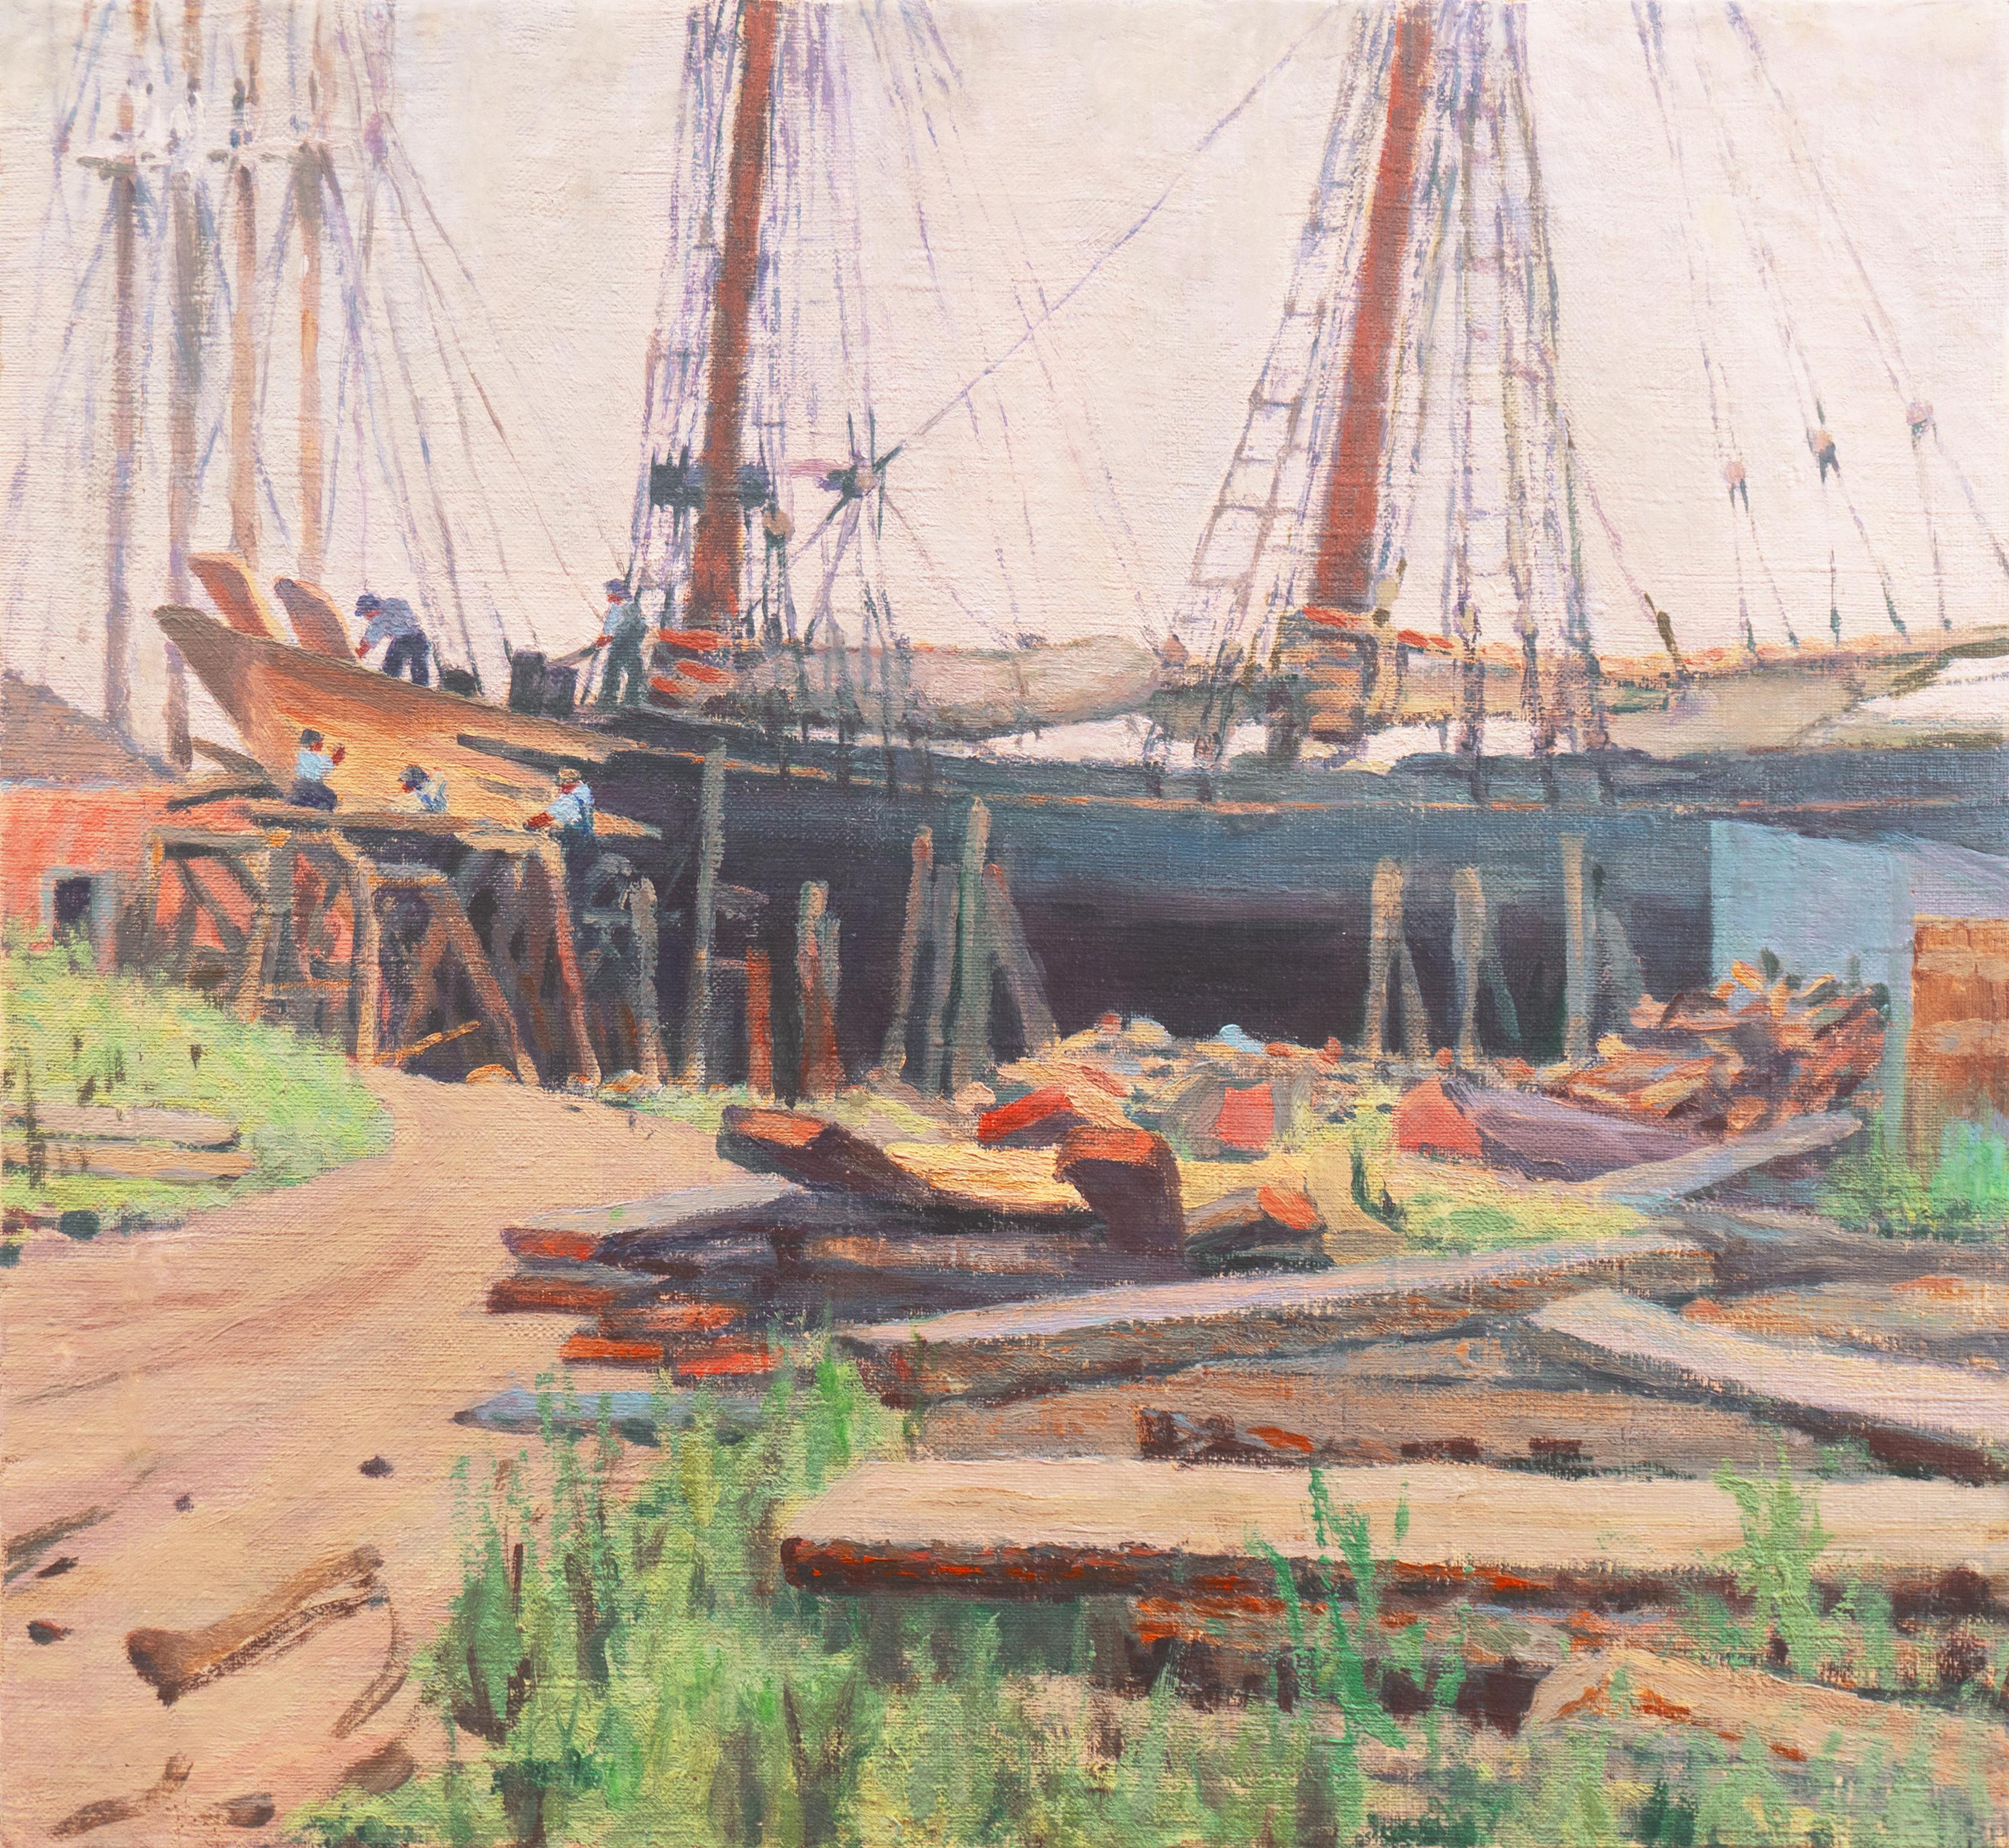 'When the Boats Were Made of Wood and the Men Were Made of Steel', Impressionist